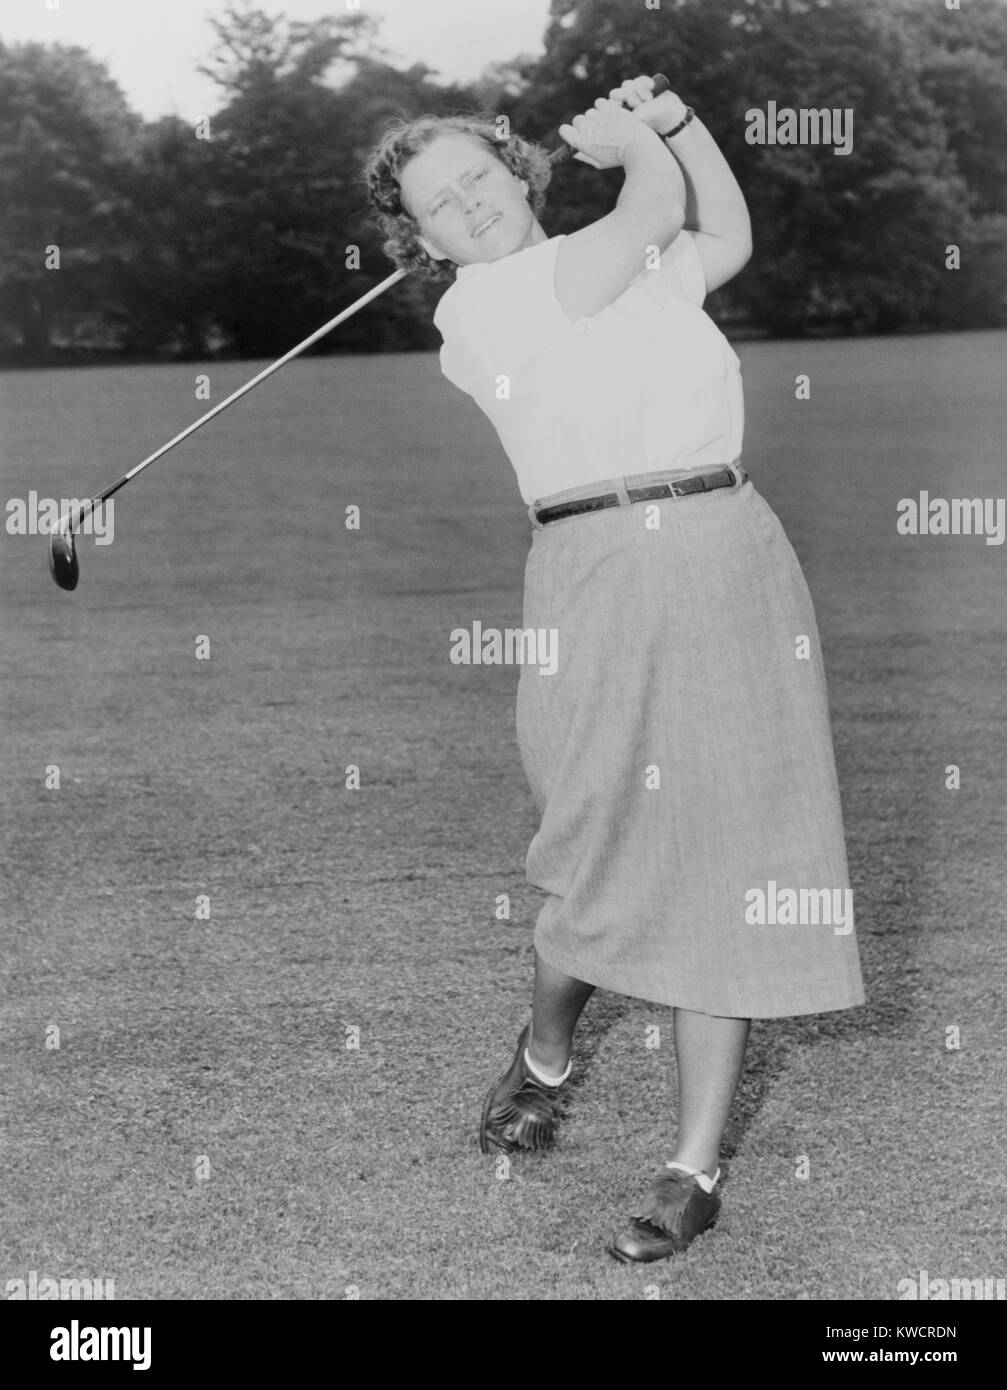 Patty Berg playing golf in 1951. She was a founding member and player on the LPGA Tour. She won 15 major titles from 1940 to 1962. - (BSLOC 2015 1 120) Stock Photo